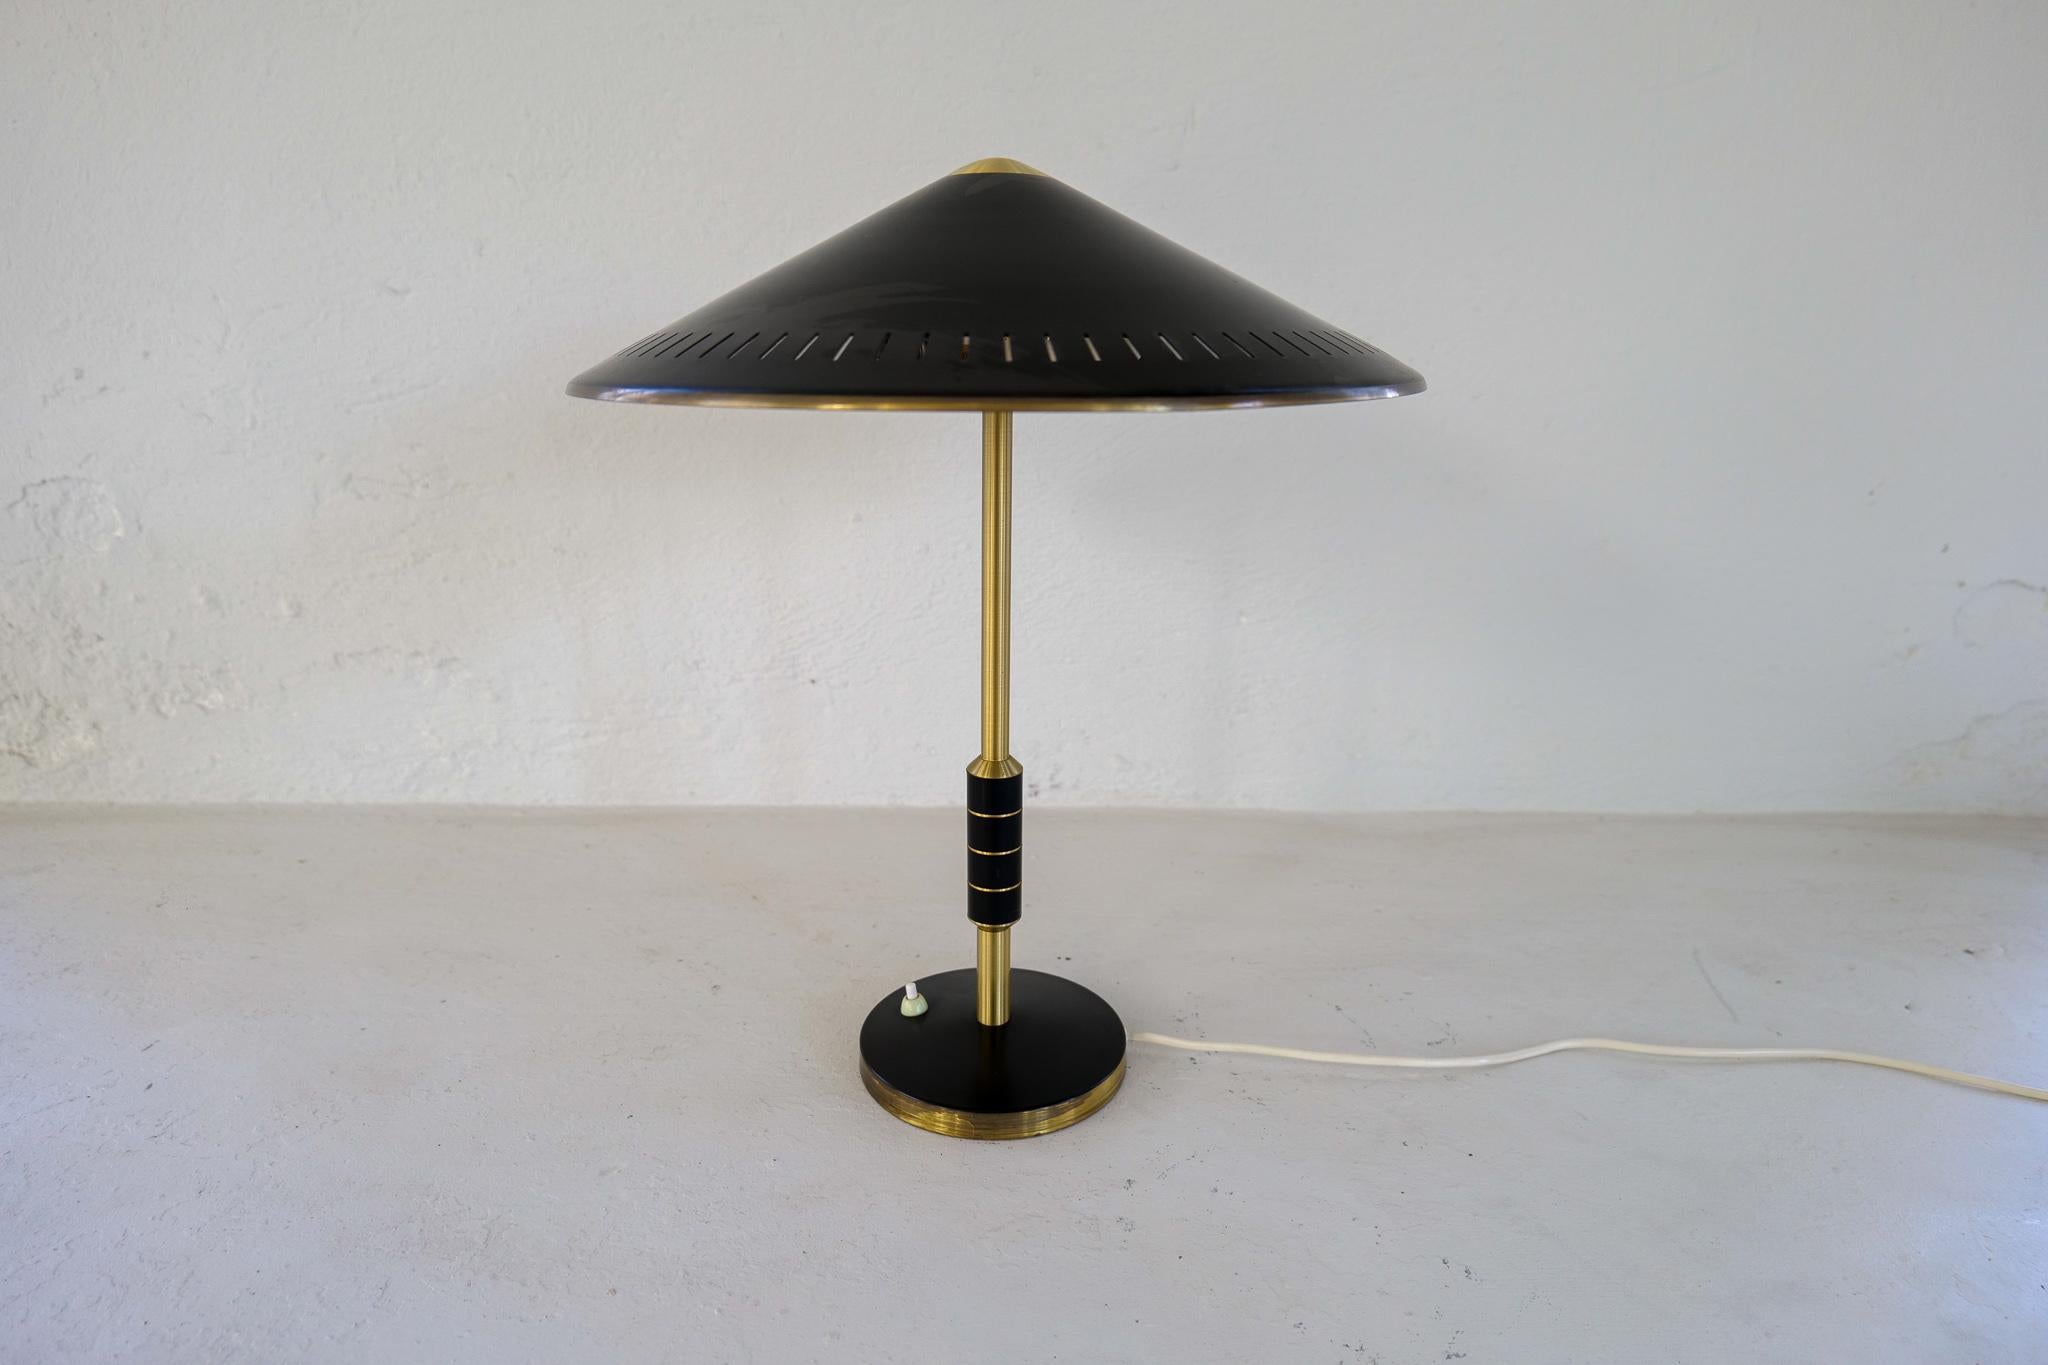 Danish Midcentury Modern Table Lamp by Bent Karlby Produced by Lyfa in Denmark, 1956 For Sale